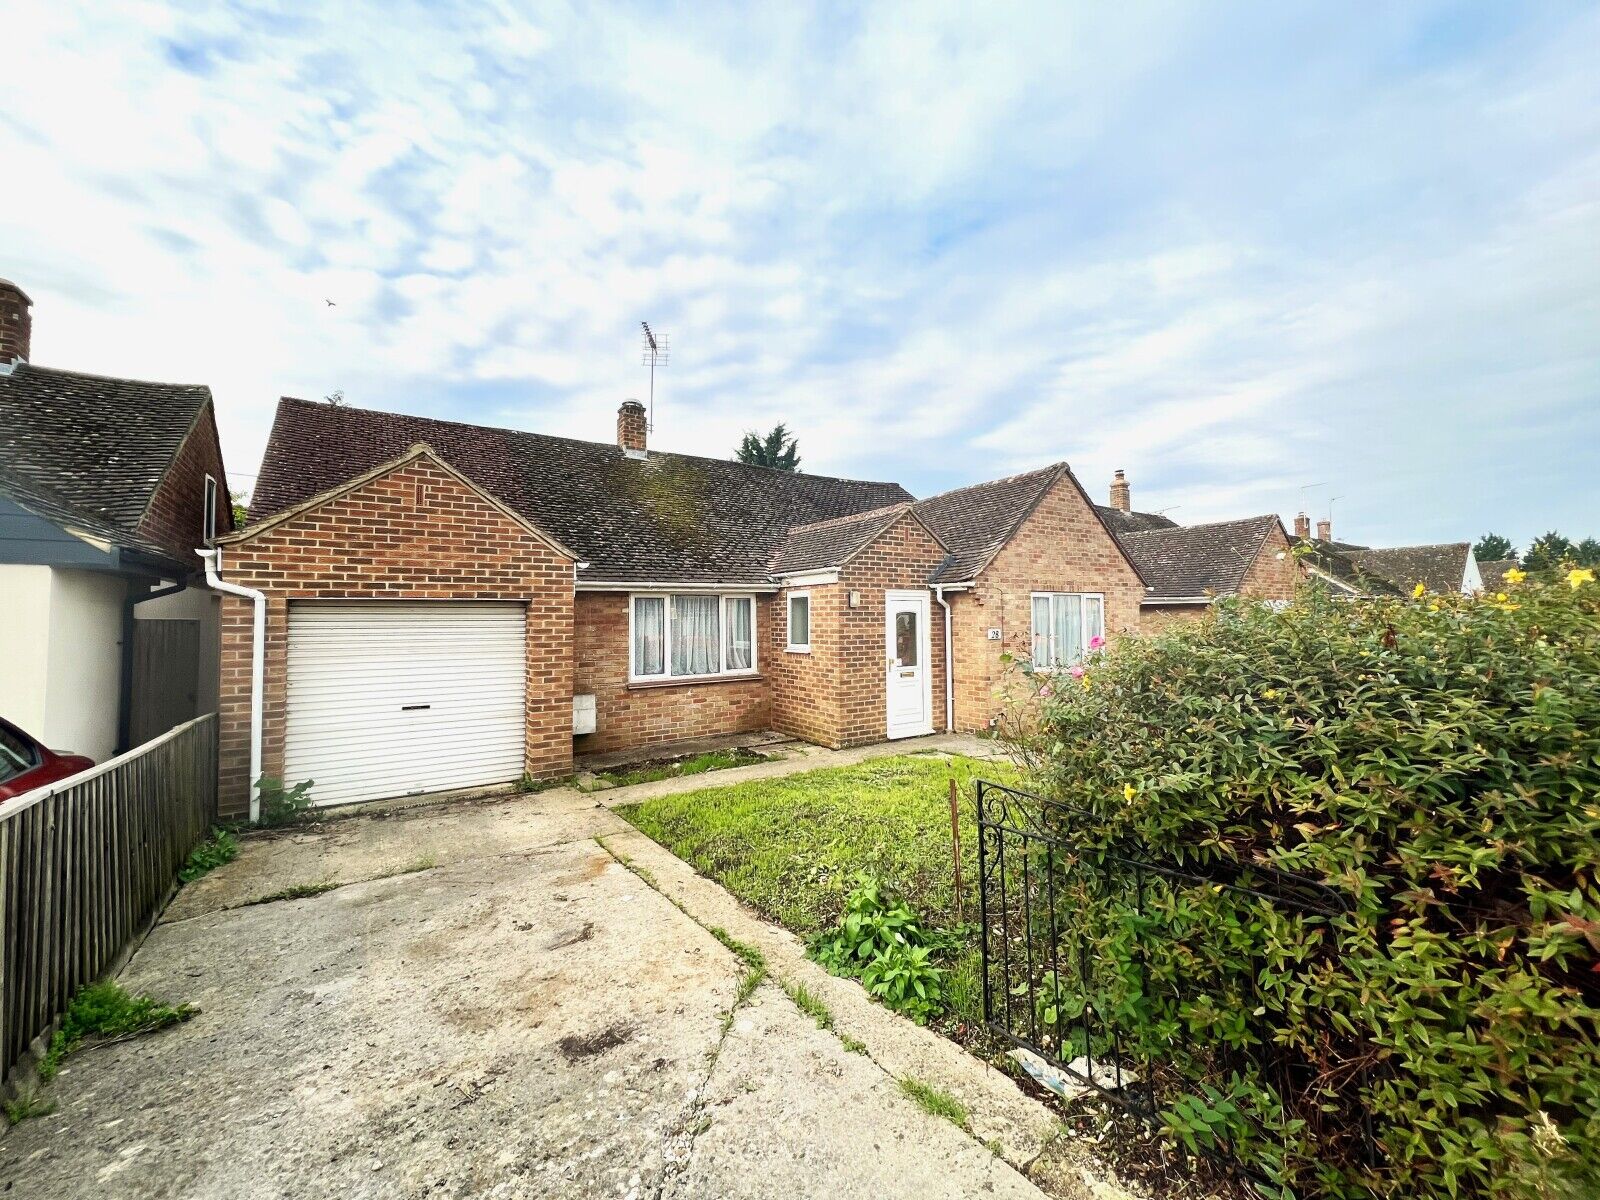 2 bedroom detached bungalow for sale Folly View Road, Faringdon, SN7, main image